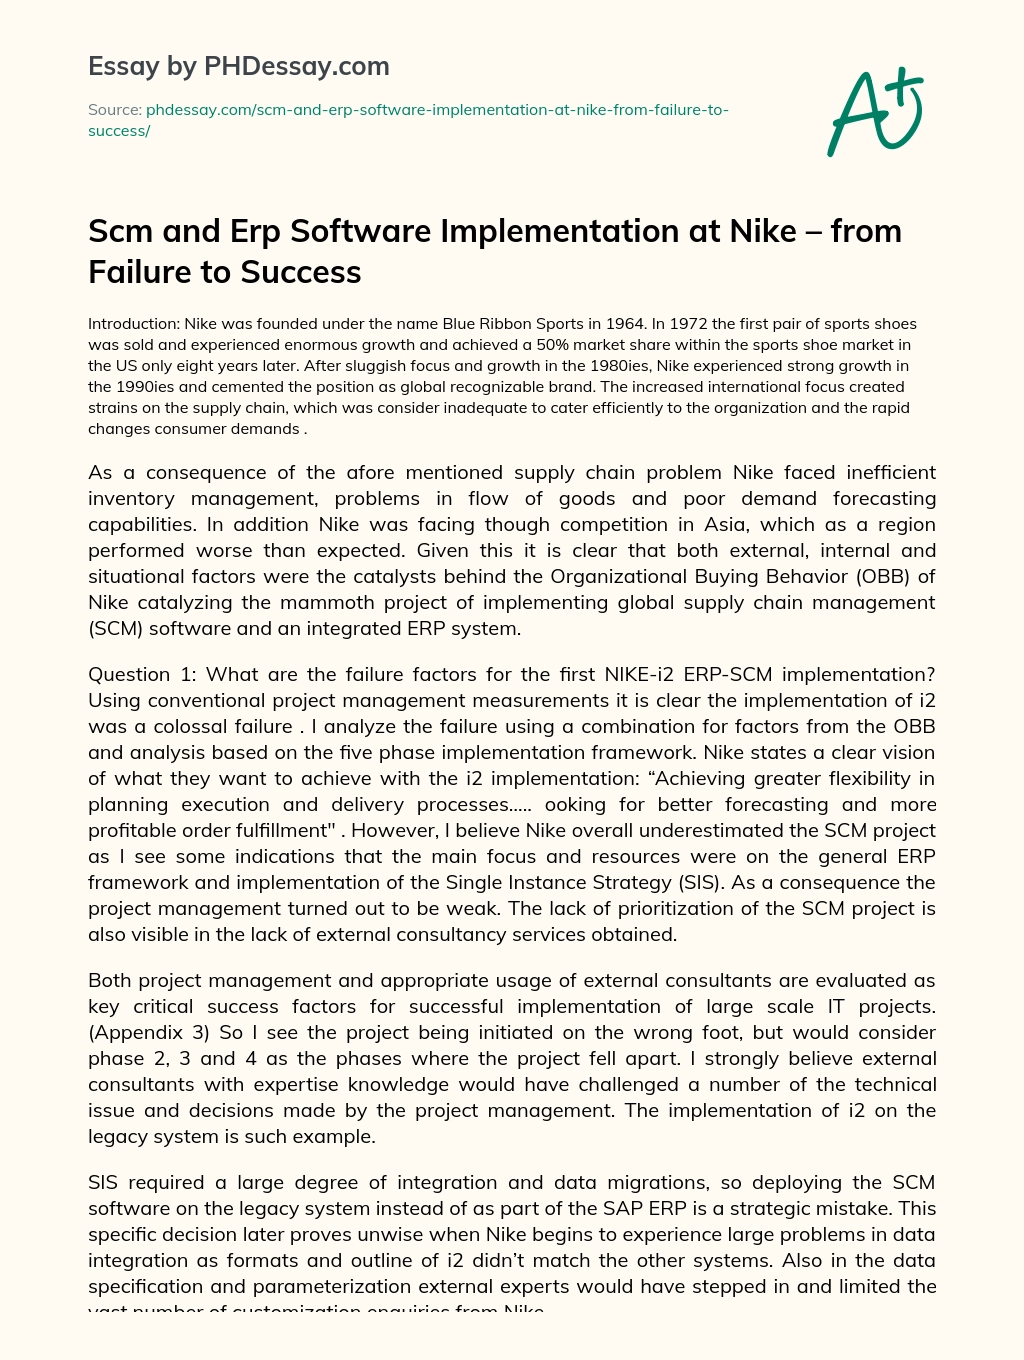 Scm and Erp Software Implementation at Nike – from Failure to Success essay